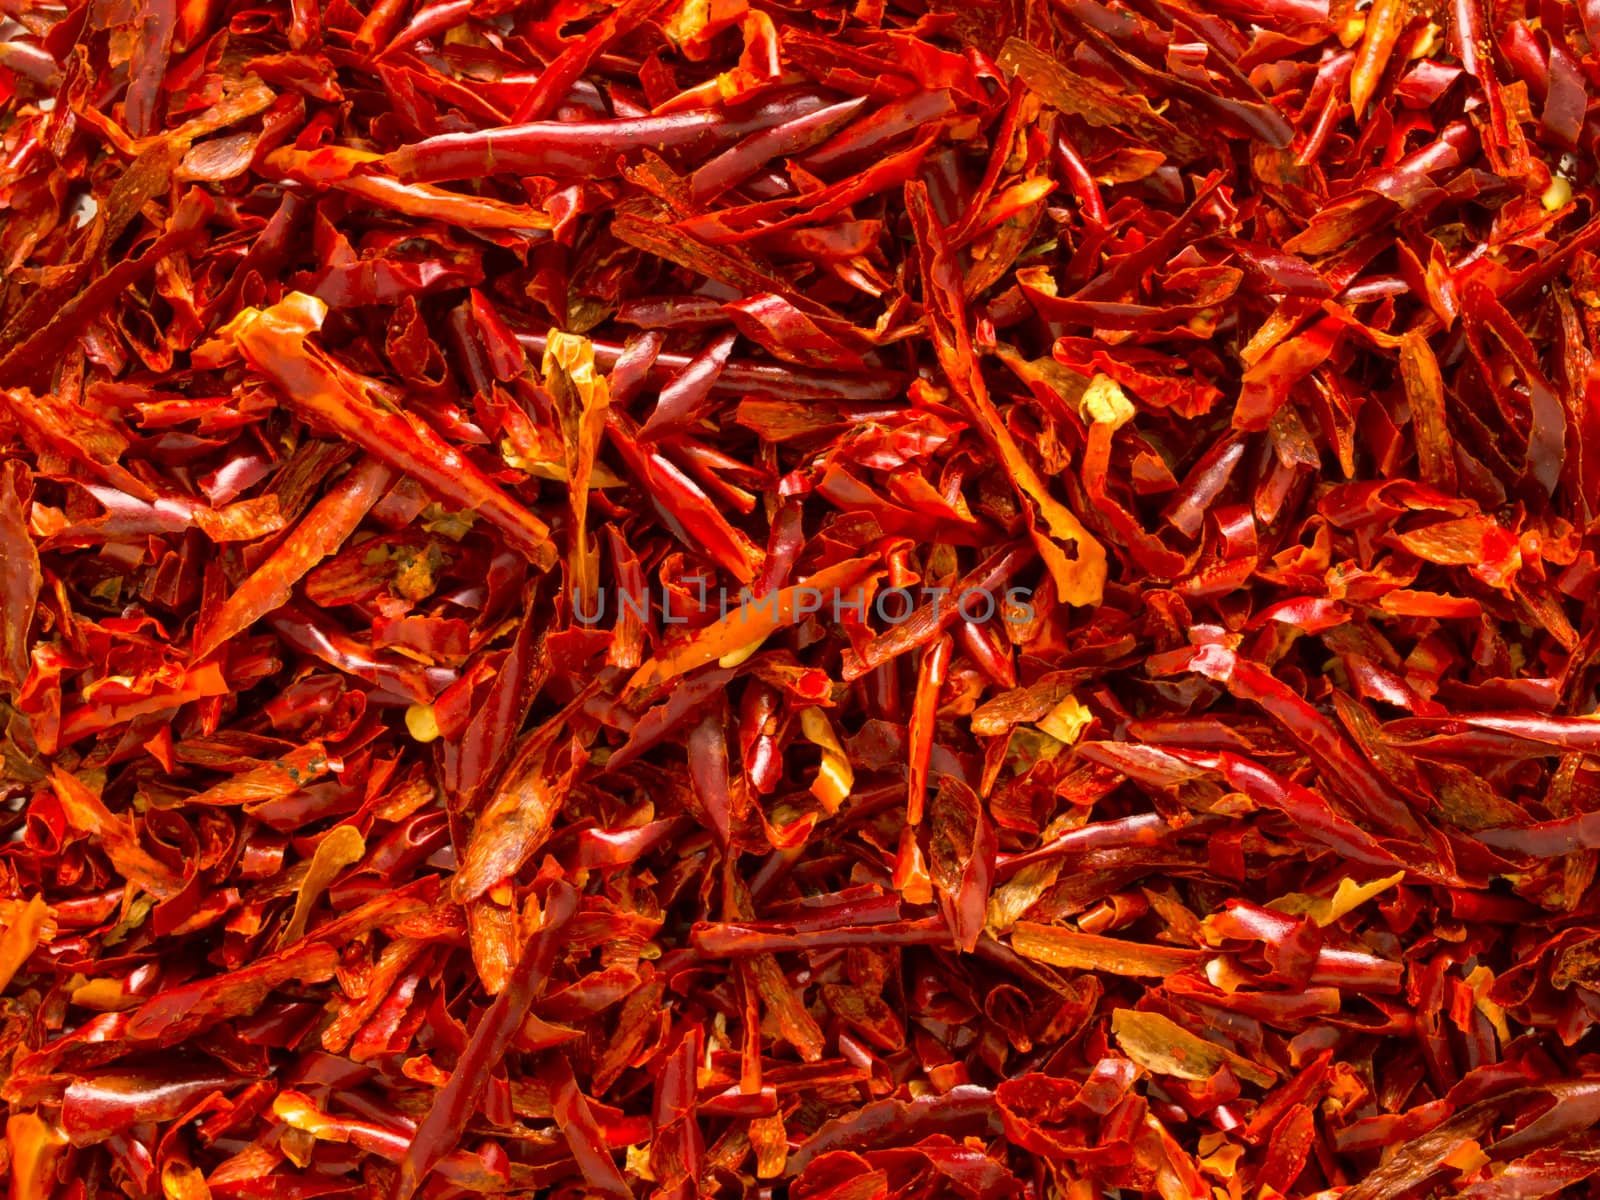 dried red chili flakes by zkruger